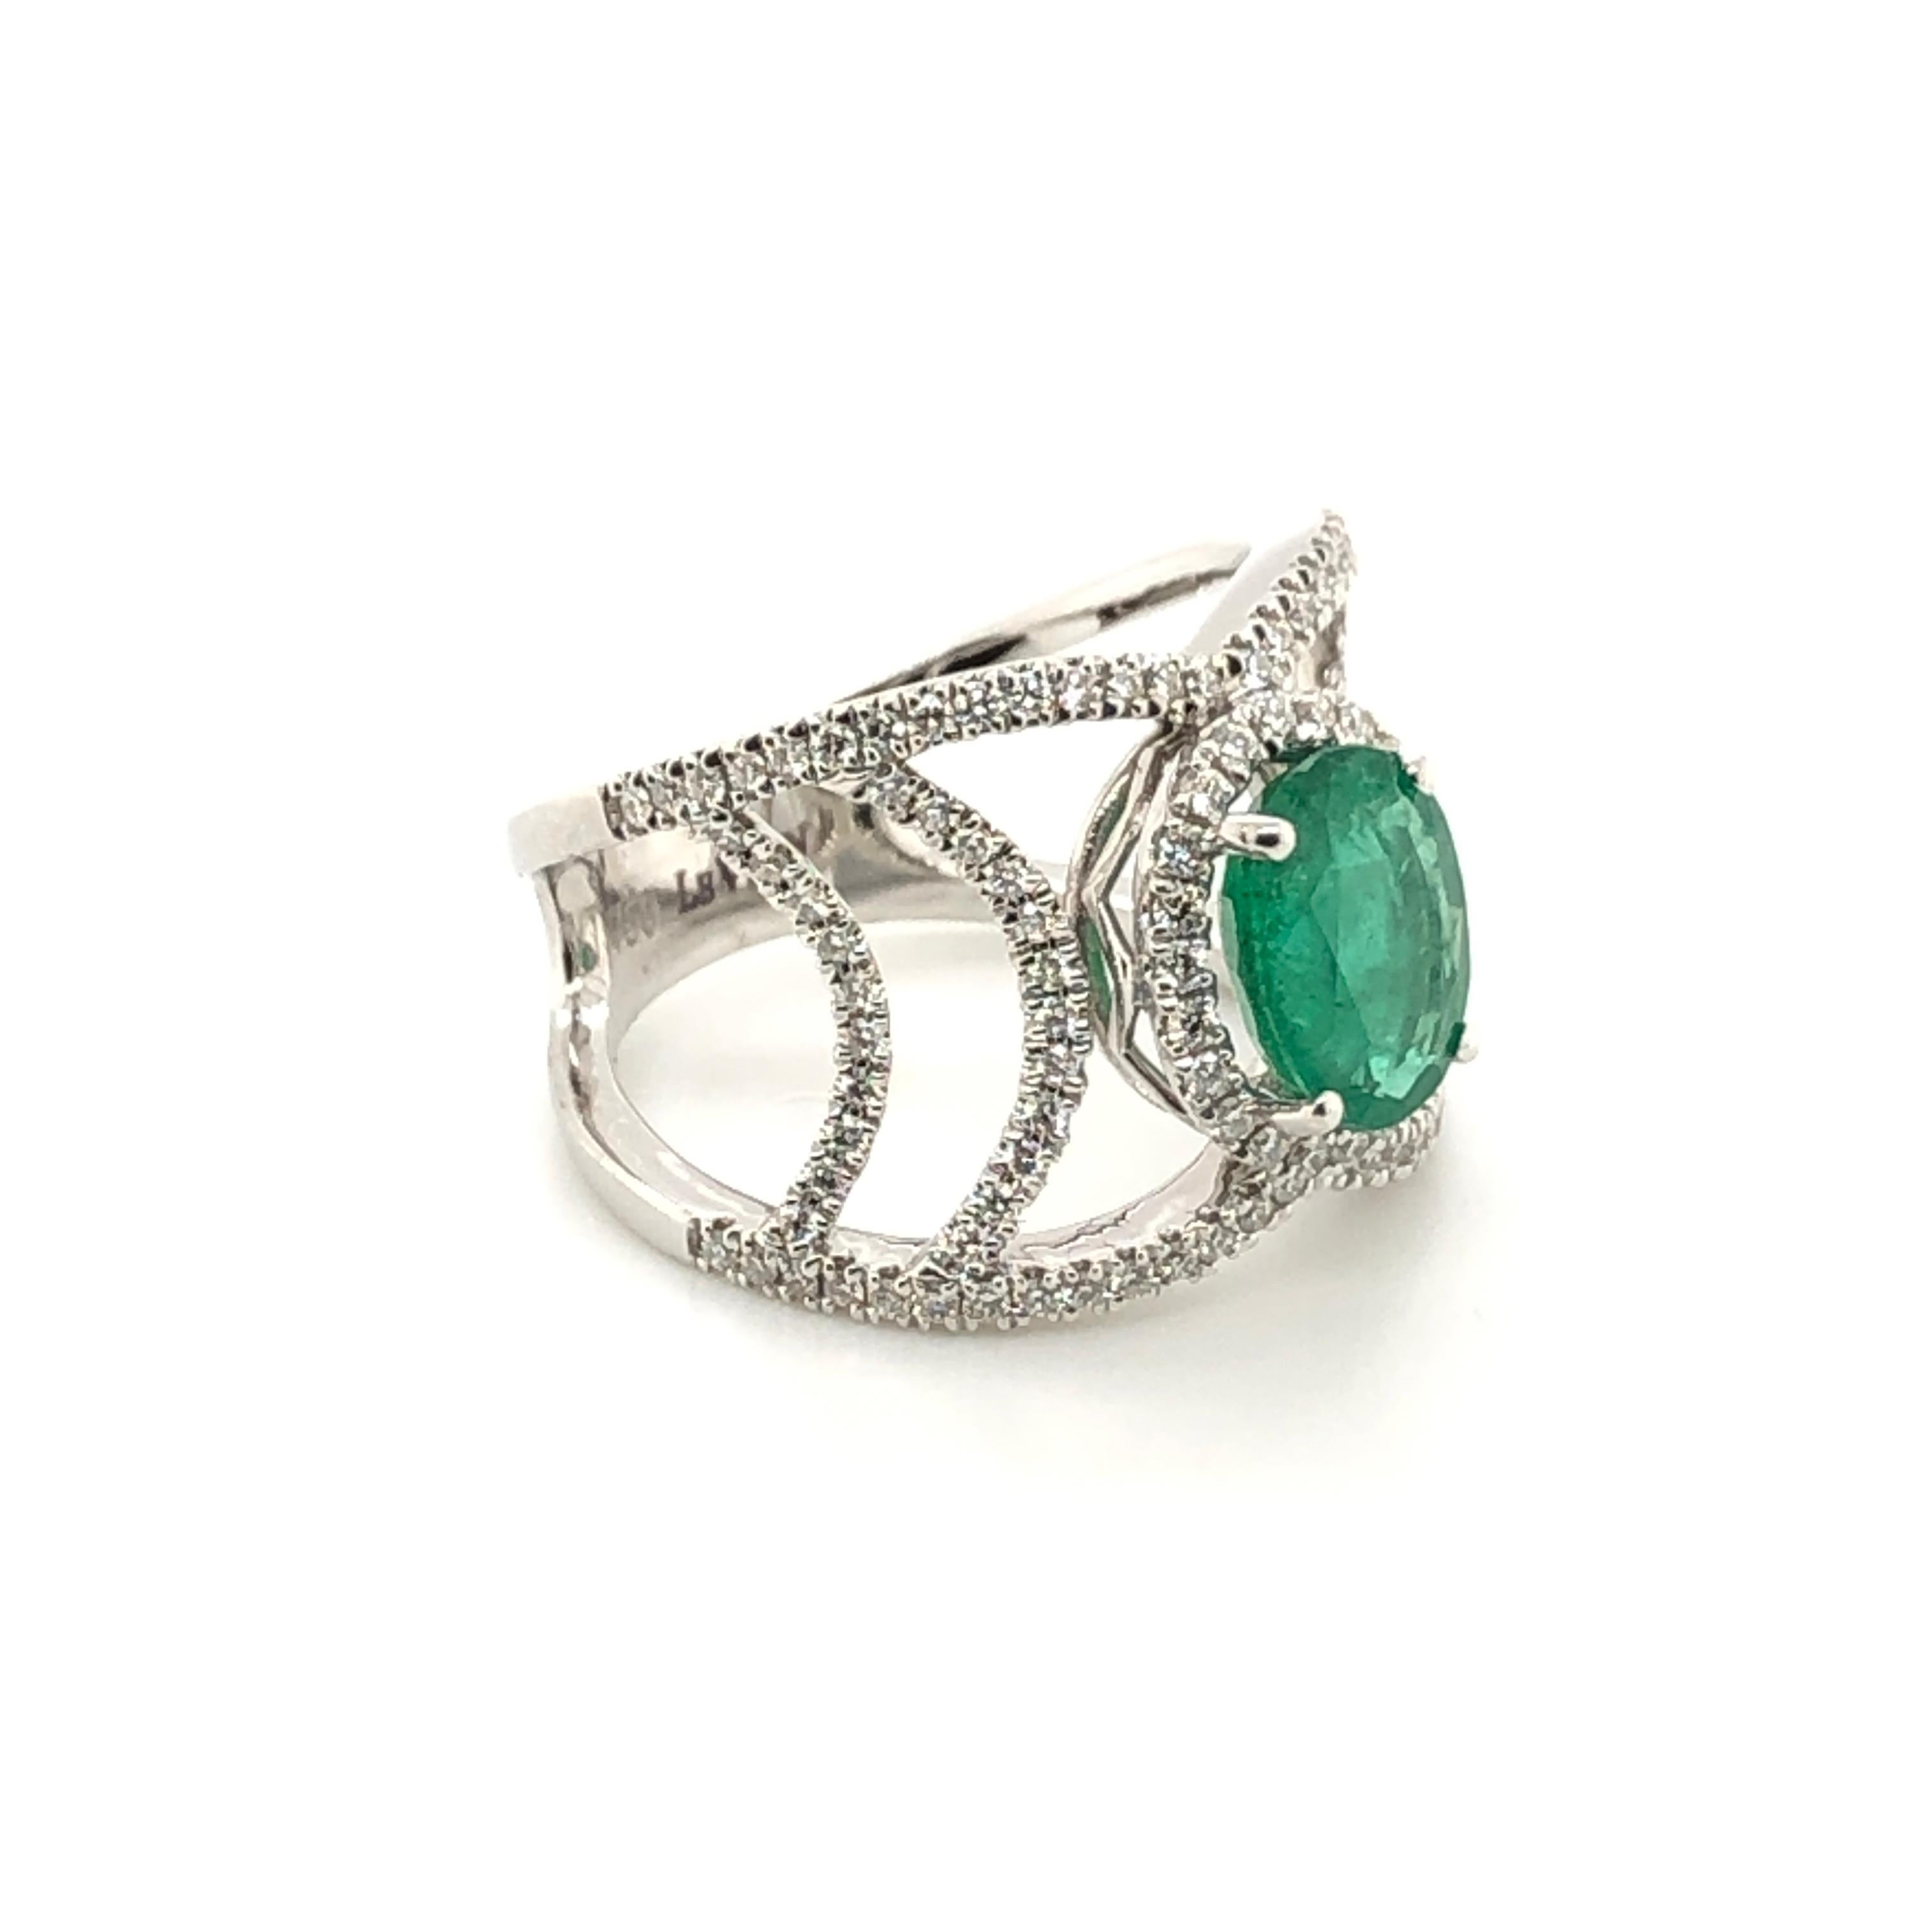 Fresh and lively with a chic and modern flare best describes this 18K White Gold ring from Le Vian Couture. At center, a 1-3/4 carat oval Emerald with open style band lined with 3/4 ct t.w. White Diamonds.

Ring Size: 6.75